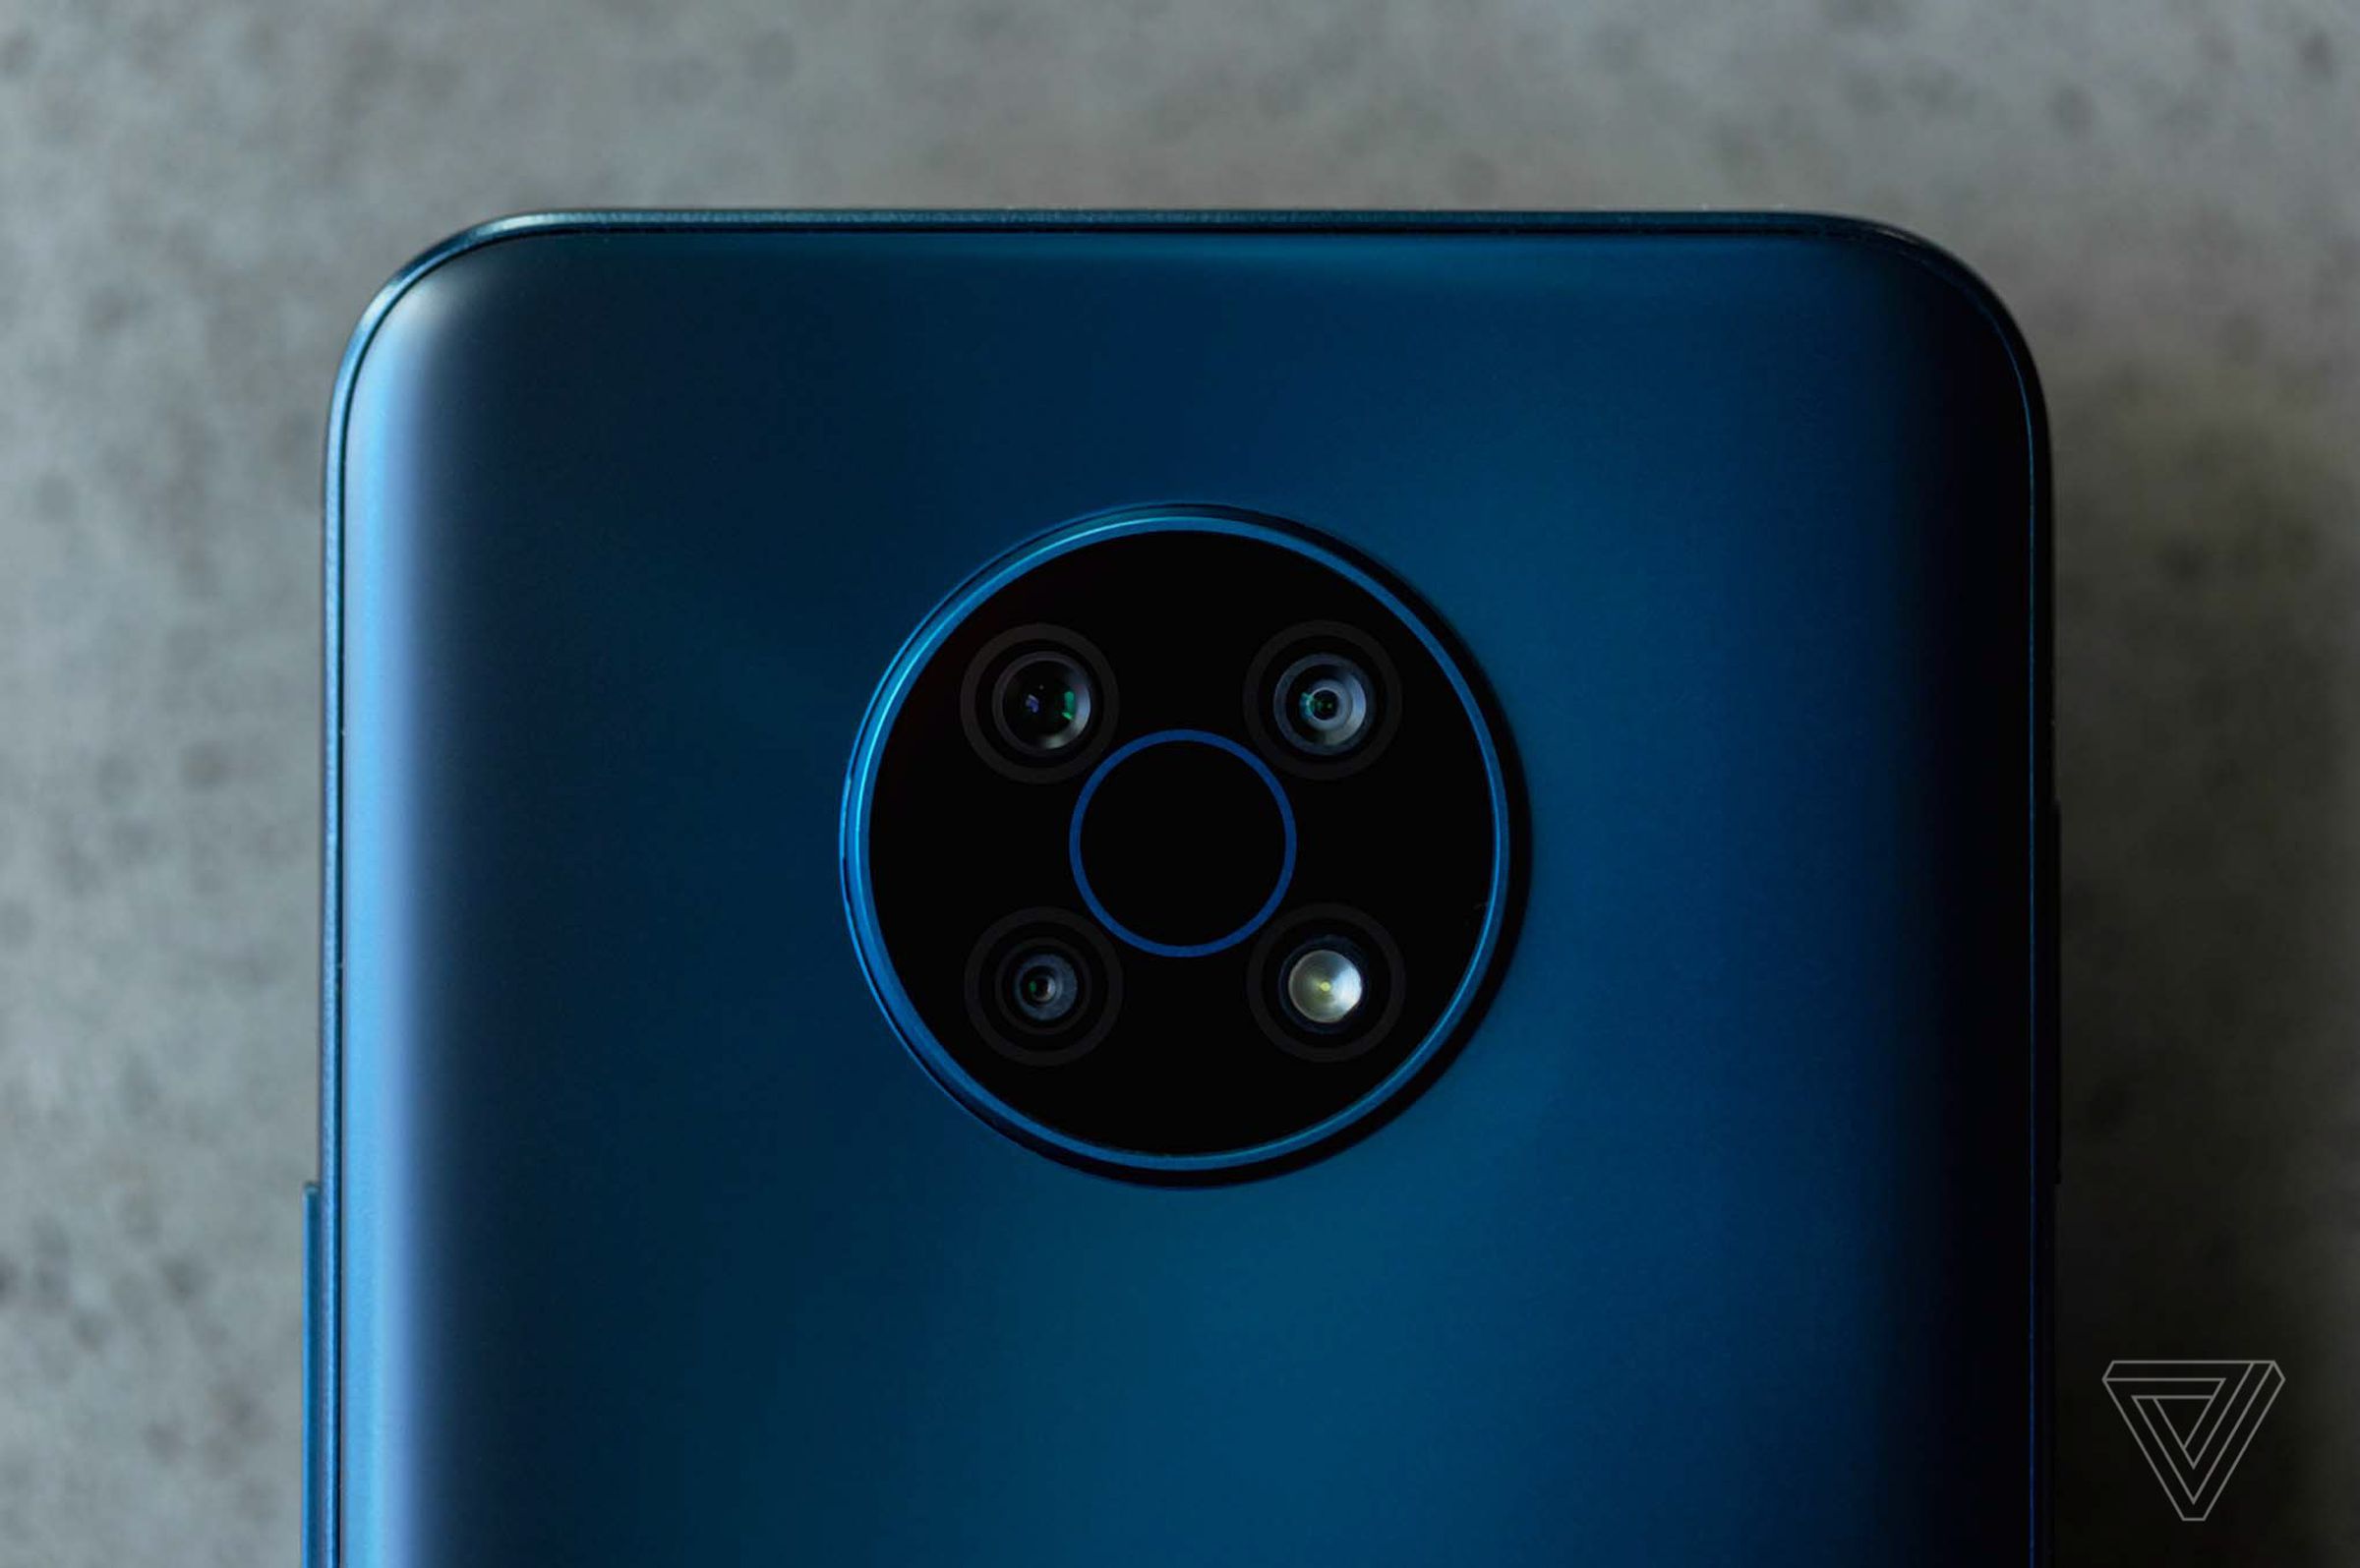 You can tell this is a Nokia phone by its iconic circular array of three rear cameras on the back of the phone.